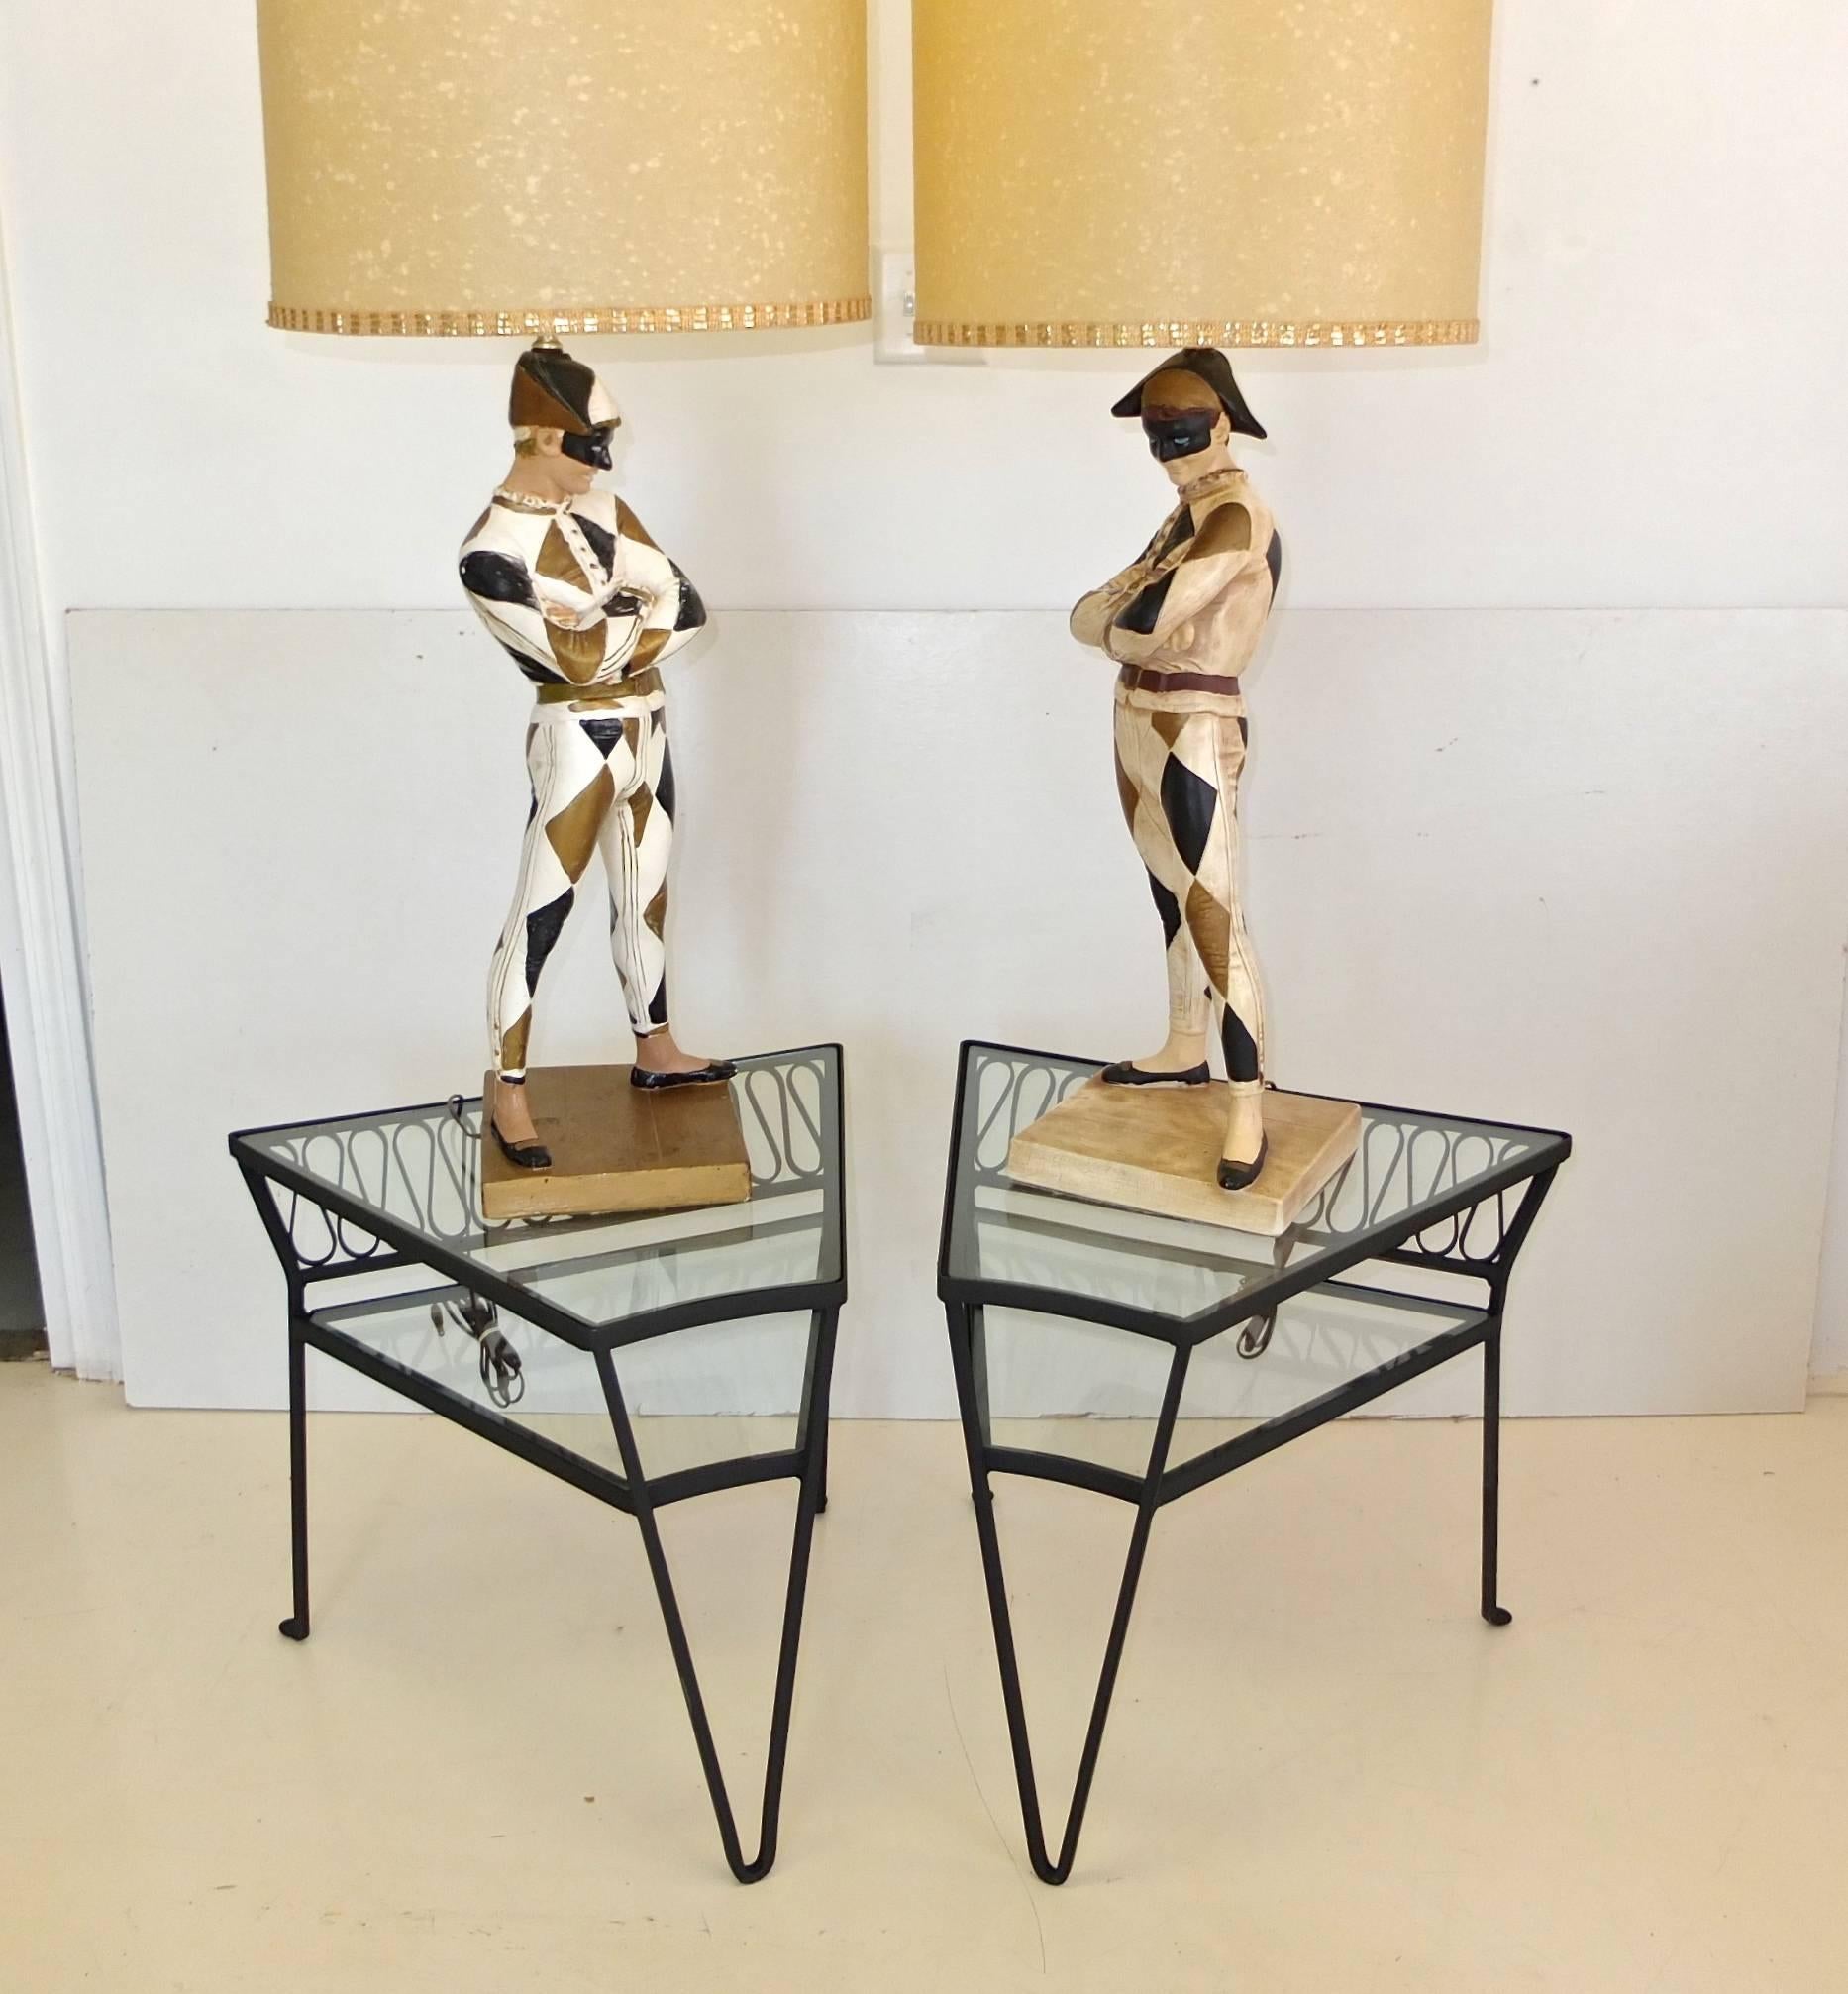 SATURDAY SALE

For a splash (or tsunami!) of Hollywood Regency kitsch glamour you must have this pair of monumental Harlequin lamps. These lamps were created by the Marbro Lamp Company of Los Angeles, which produced high end lamps favored by